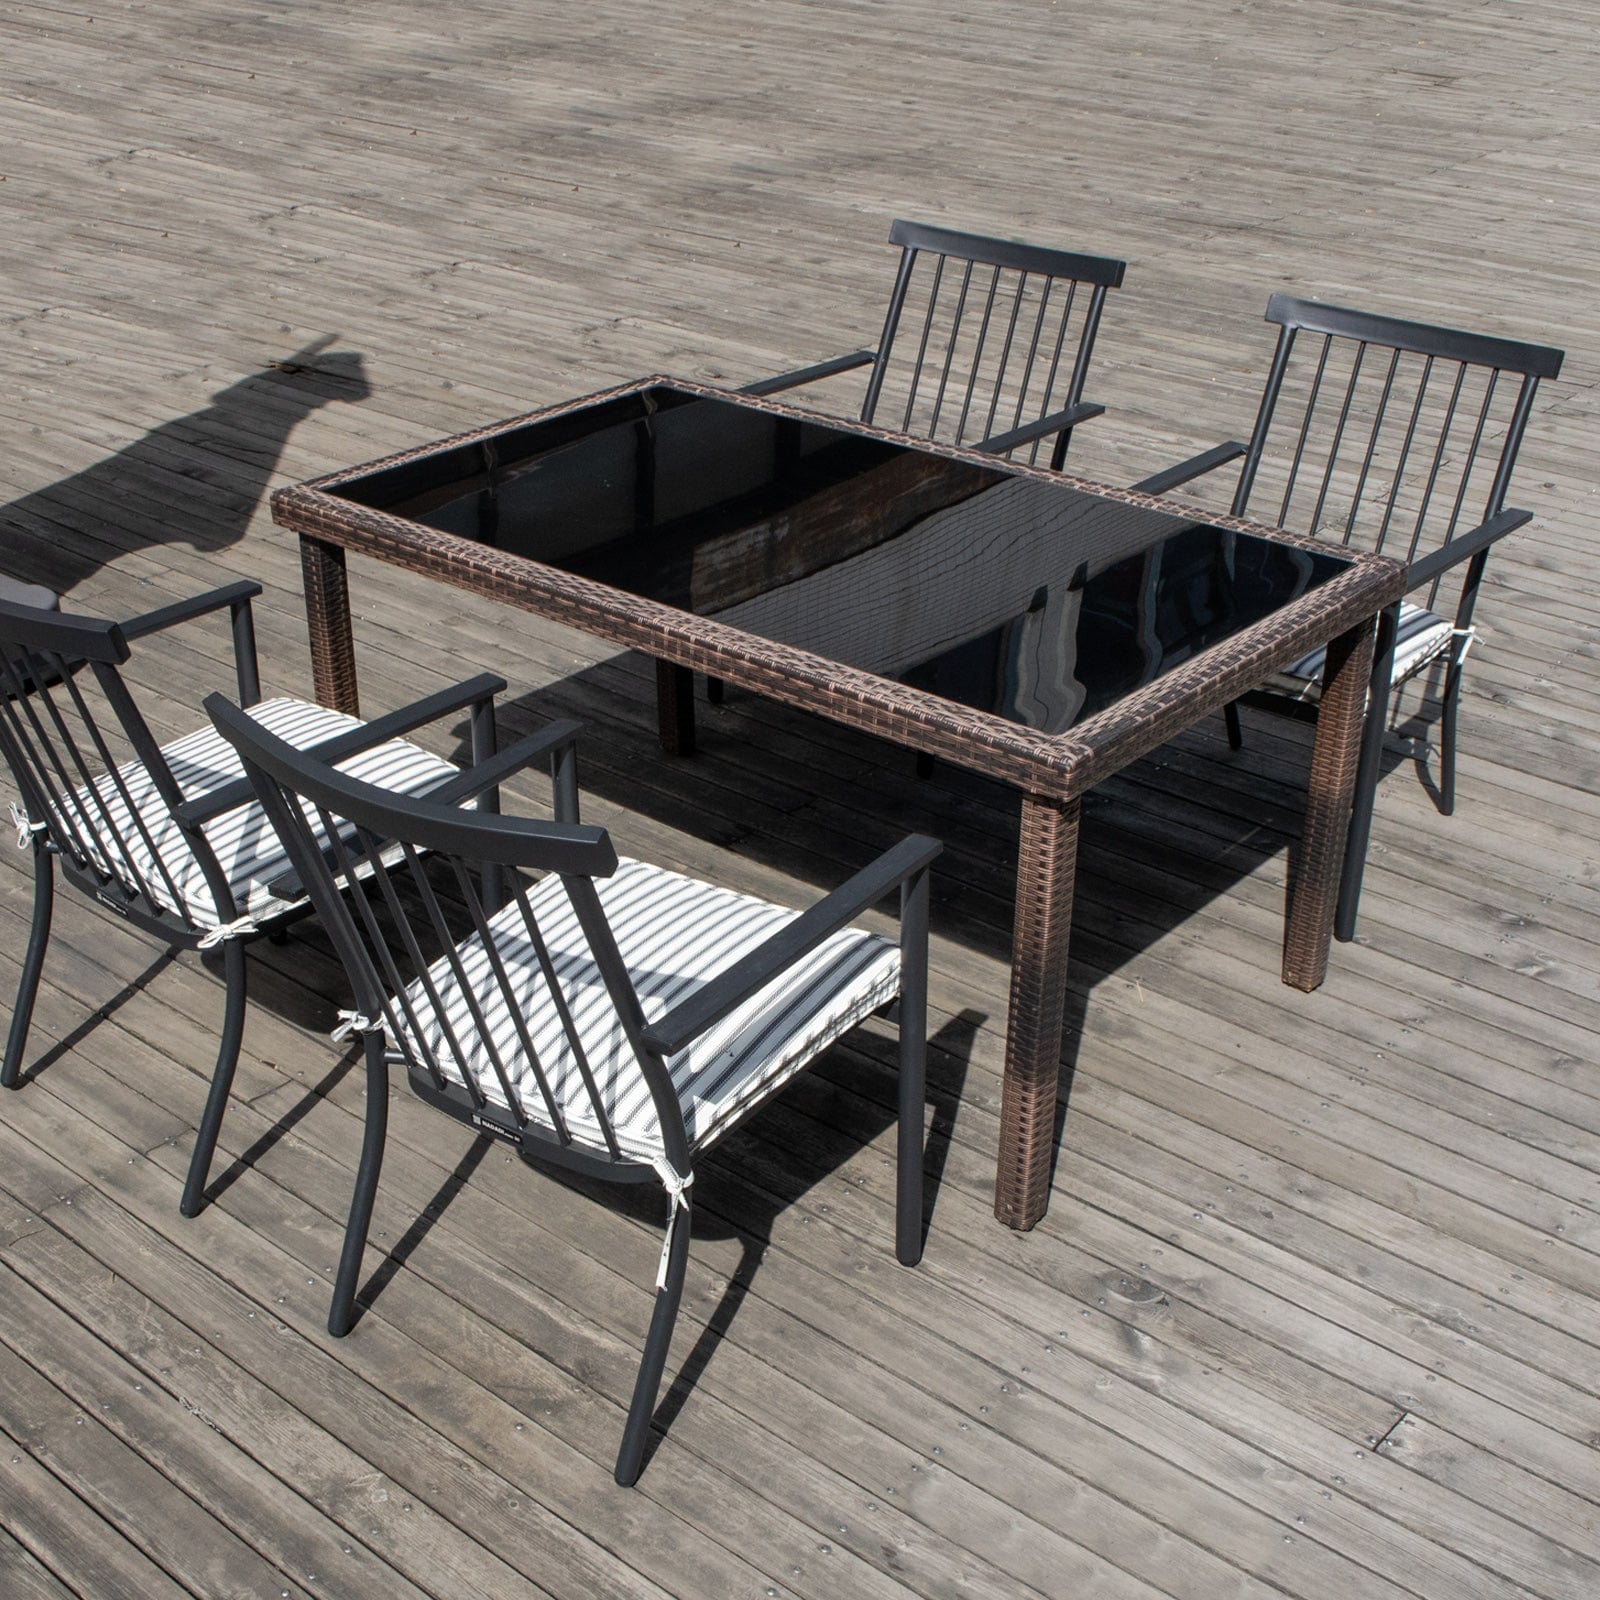 NADADI-Outdoor-Patio-Chairs-2c-Matching-tables